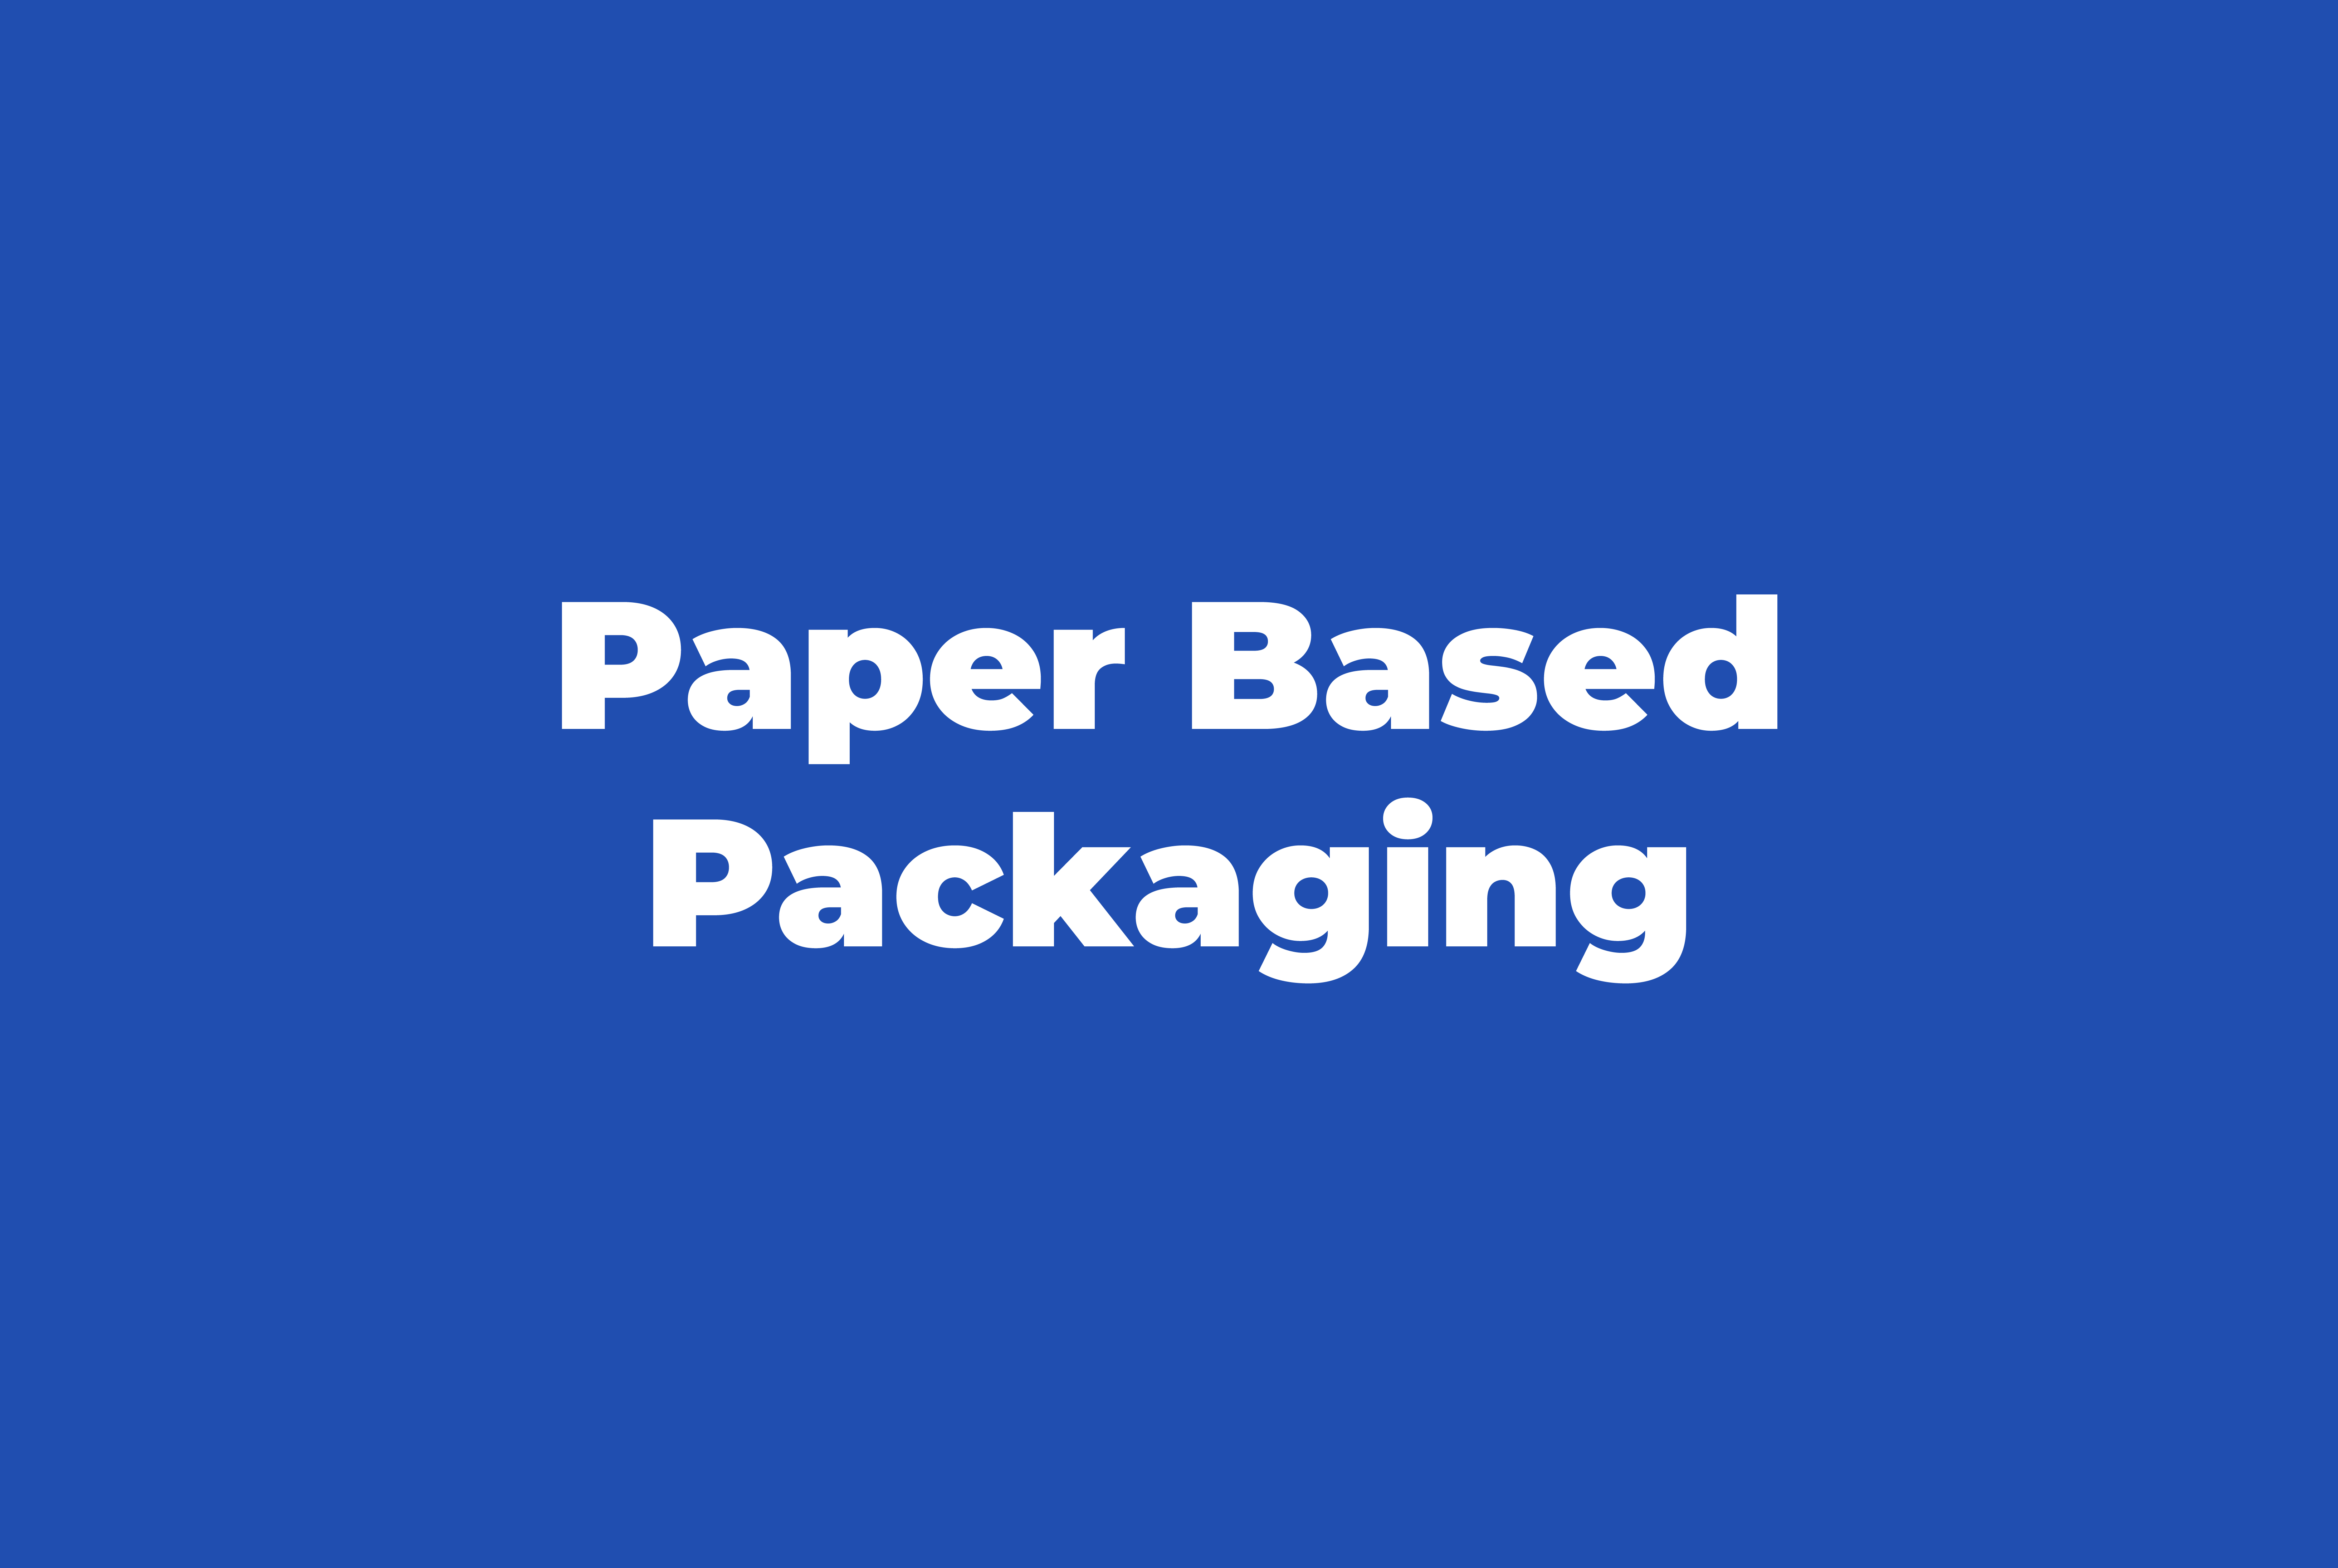 Case Study page-paper based packaging